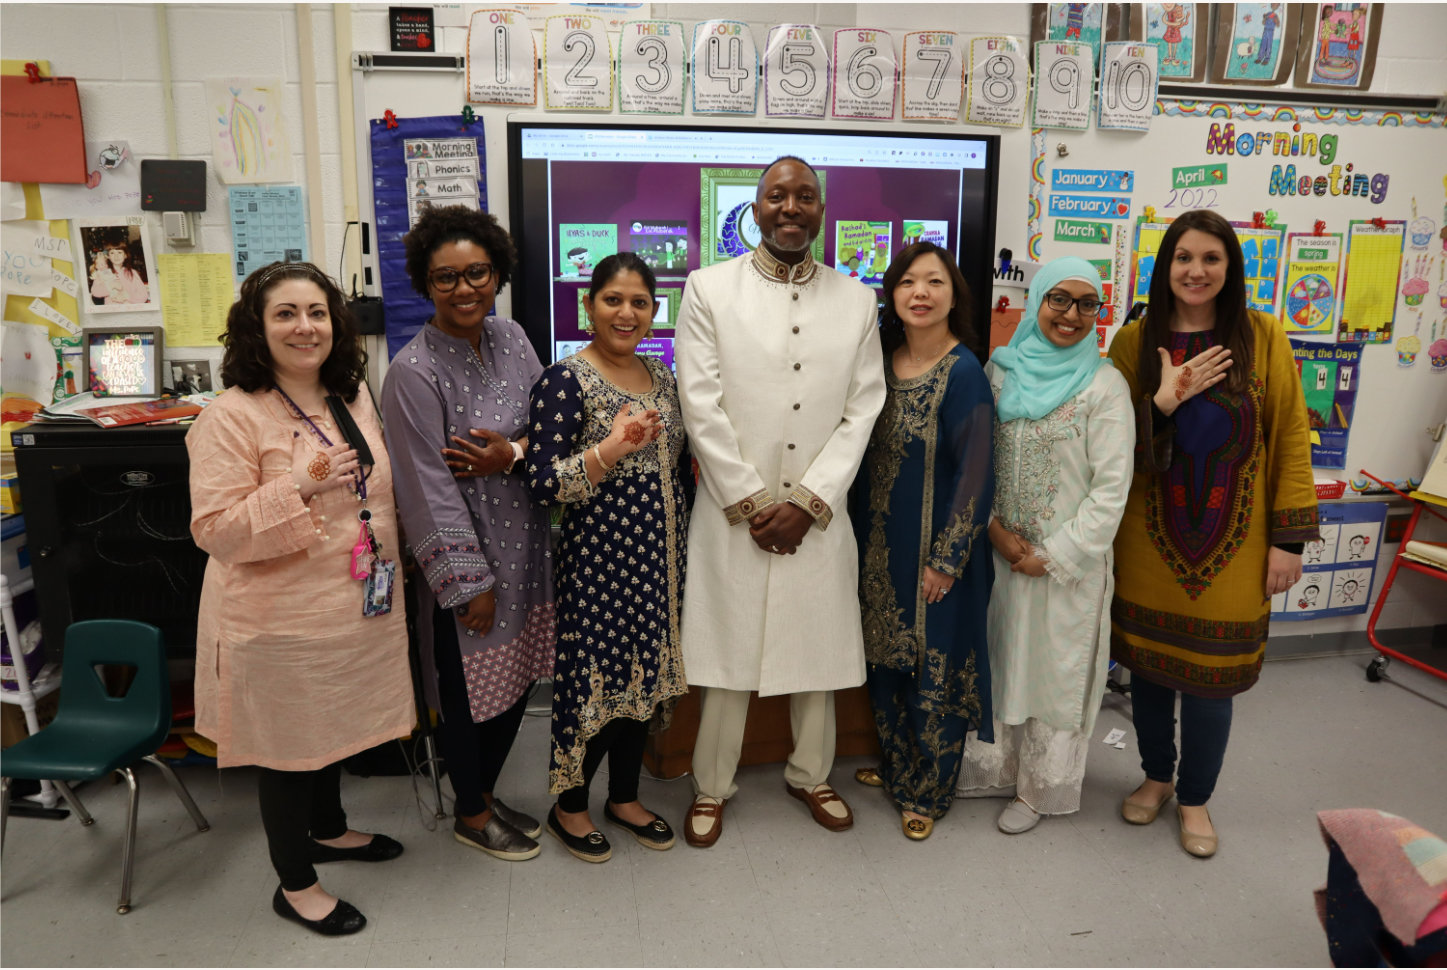 Teachers and staff at Clear Stream Avenue Elementary School dressed in traditional Islamic clothing for Eid al-Fitr.